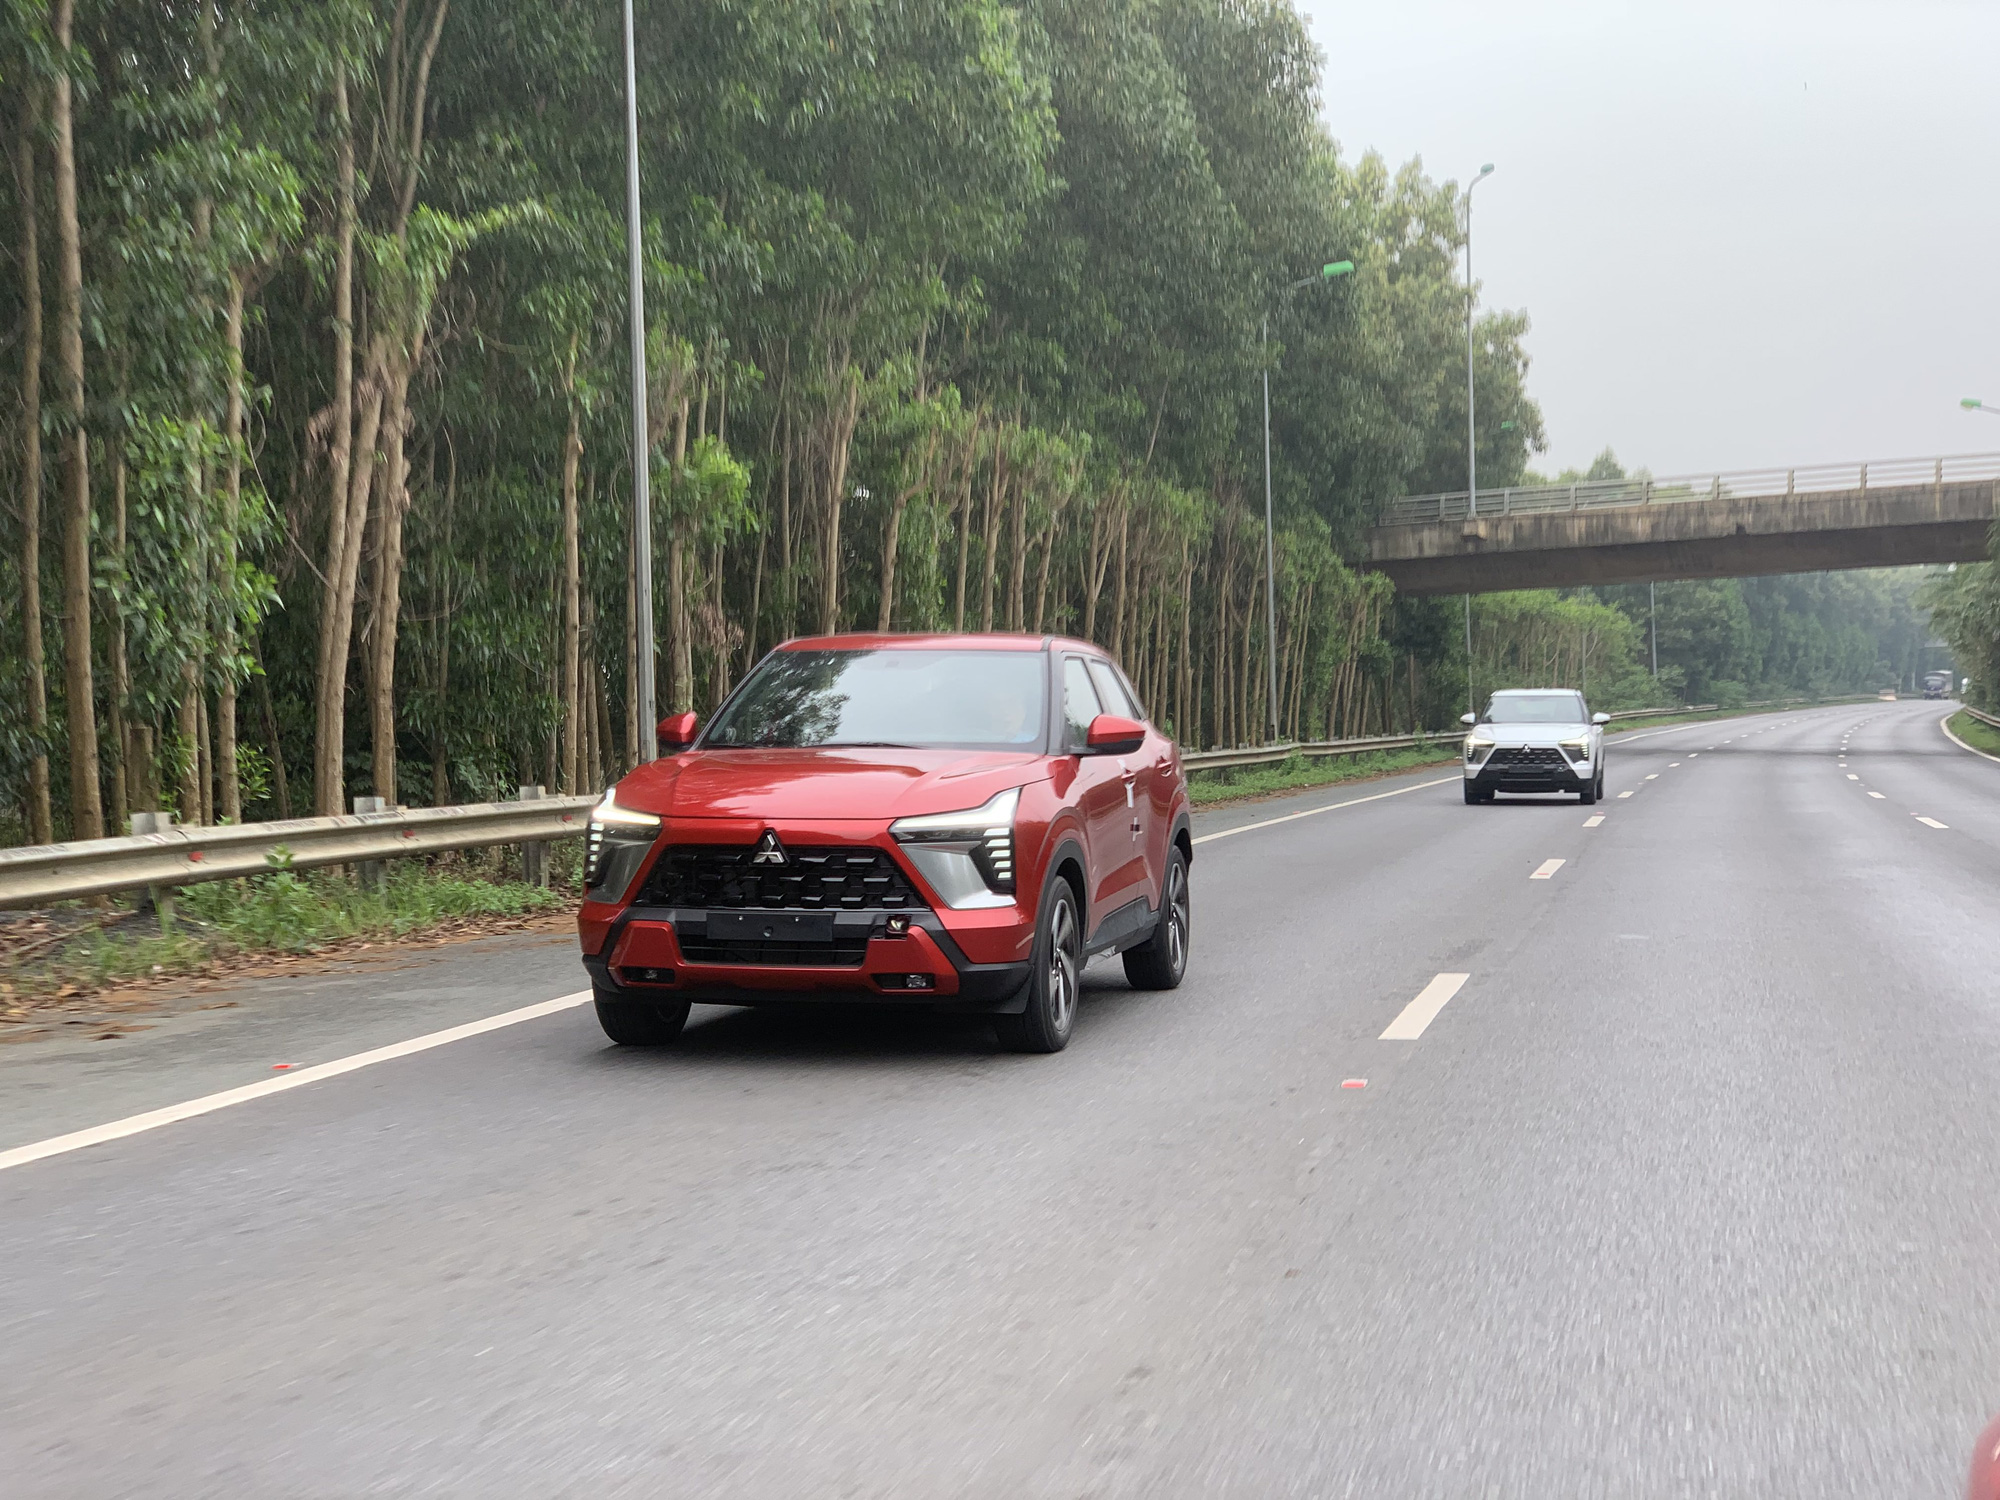 Although not yet officially launched and assigned in Vietnam, Mitsubishi Xforce is ready to release a hybrid version, just waiting for favorable policies - Photo: Facebook